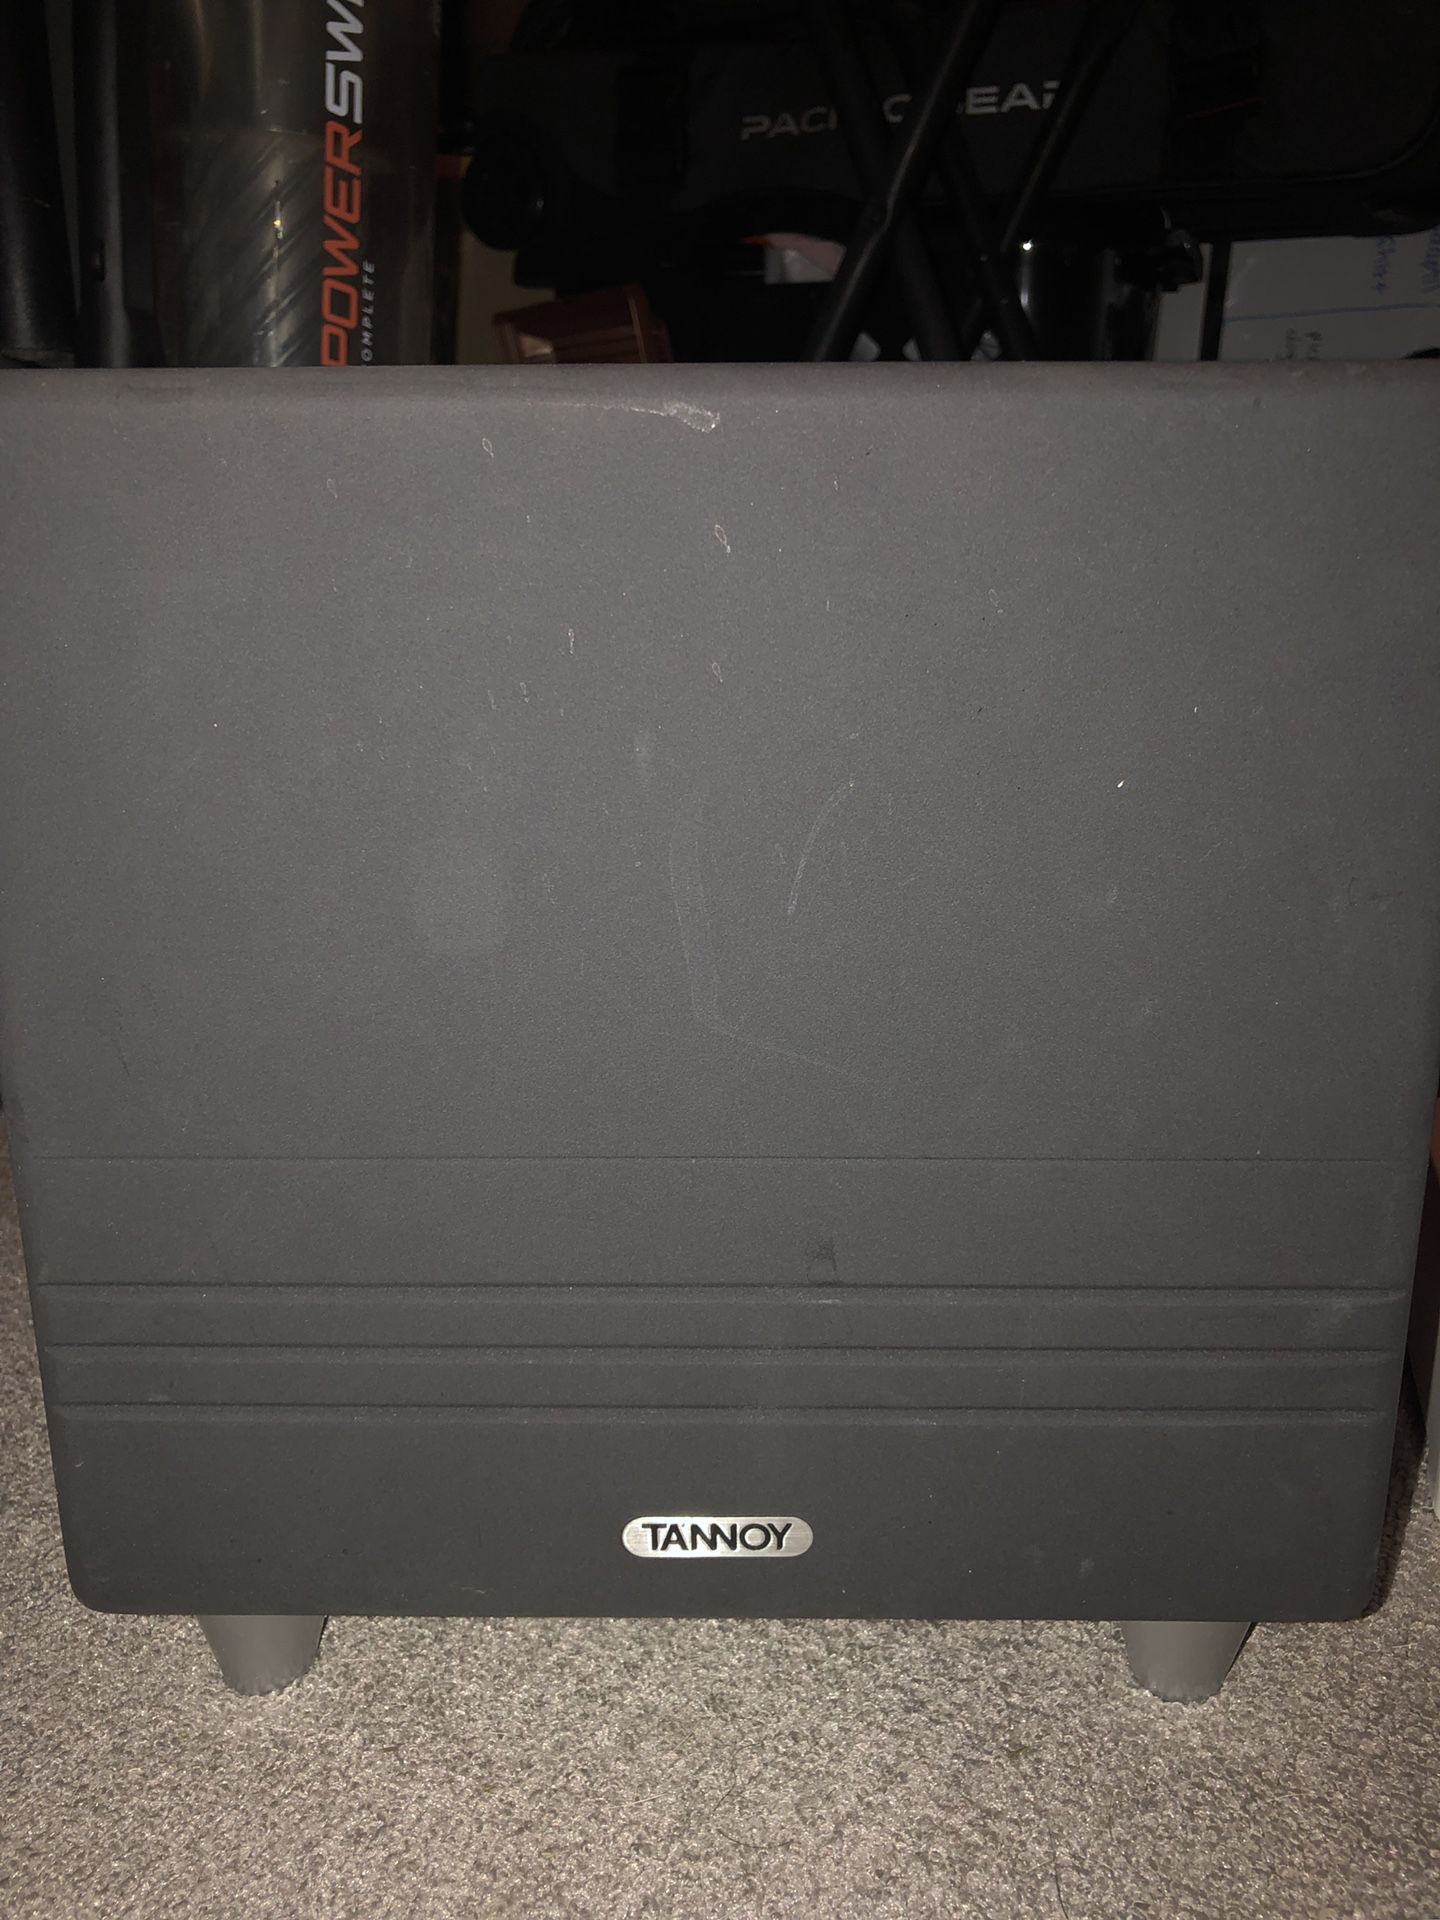 Tannoy ts8 subwoofer